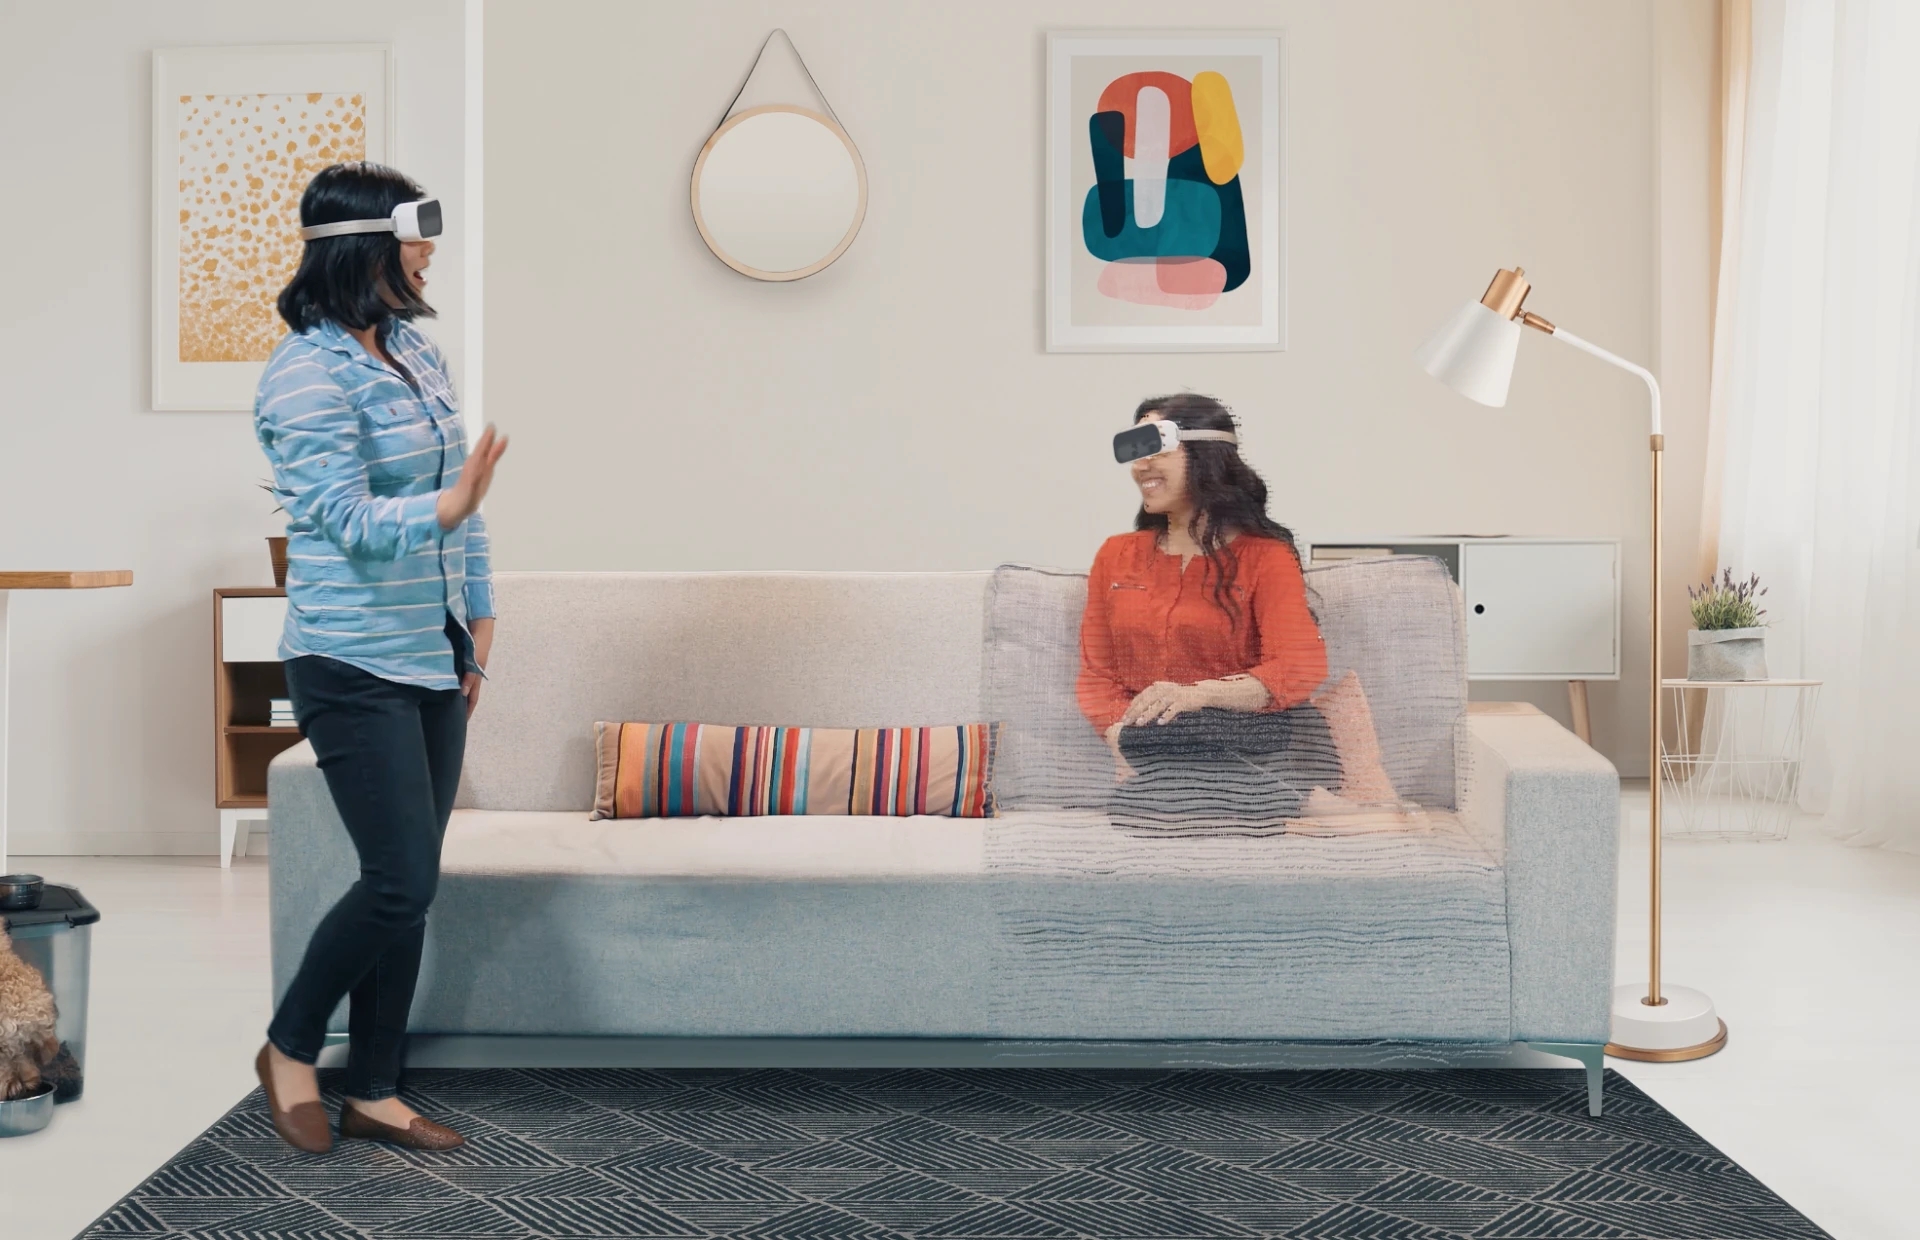 composite still from a video showing users with vr headsets that show the user's eyes through the front visor chatting together in a living room, one user appears to be virtually there